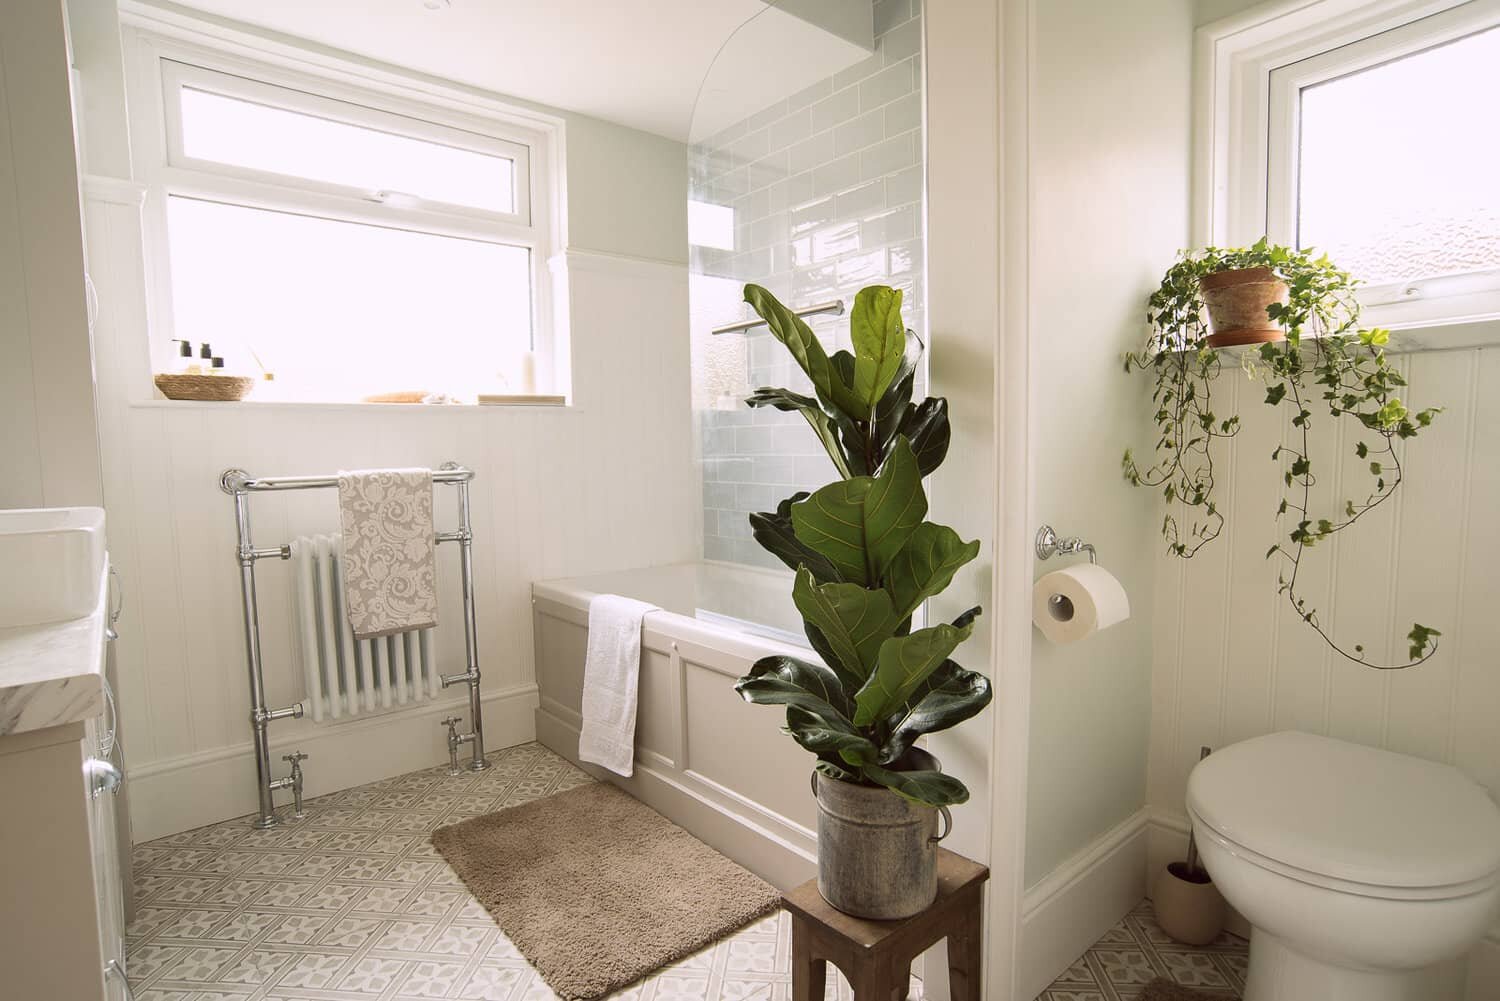 A Bathroom Renovation Cost, How Much Does It Cost To Renovate A Bathroom In London